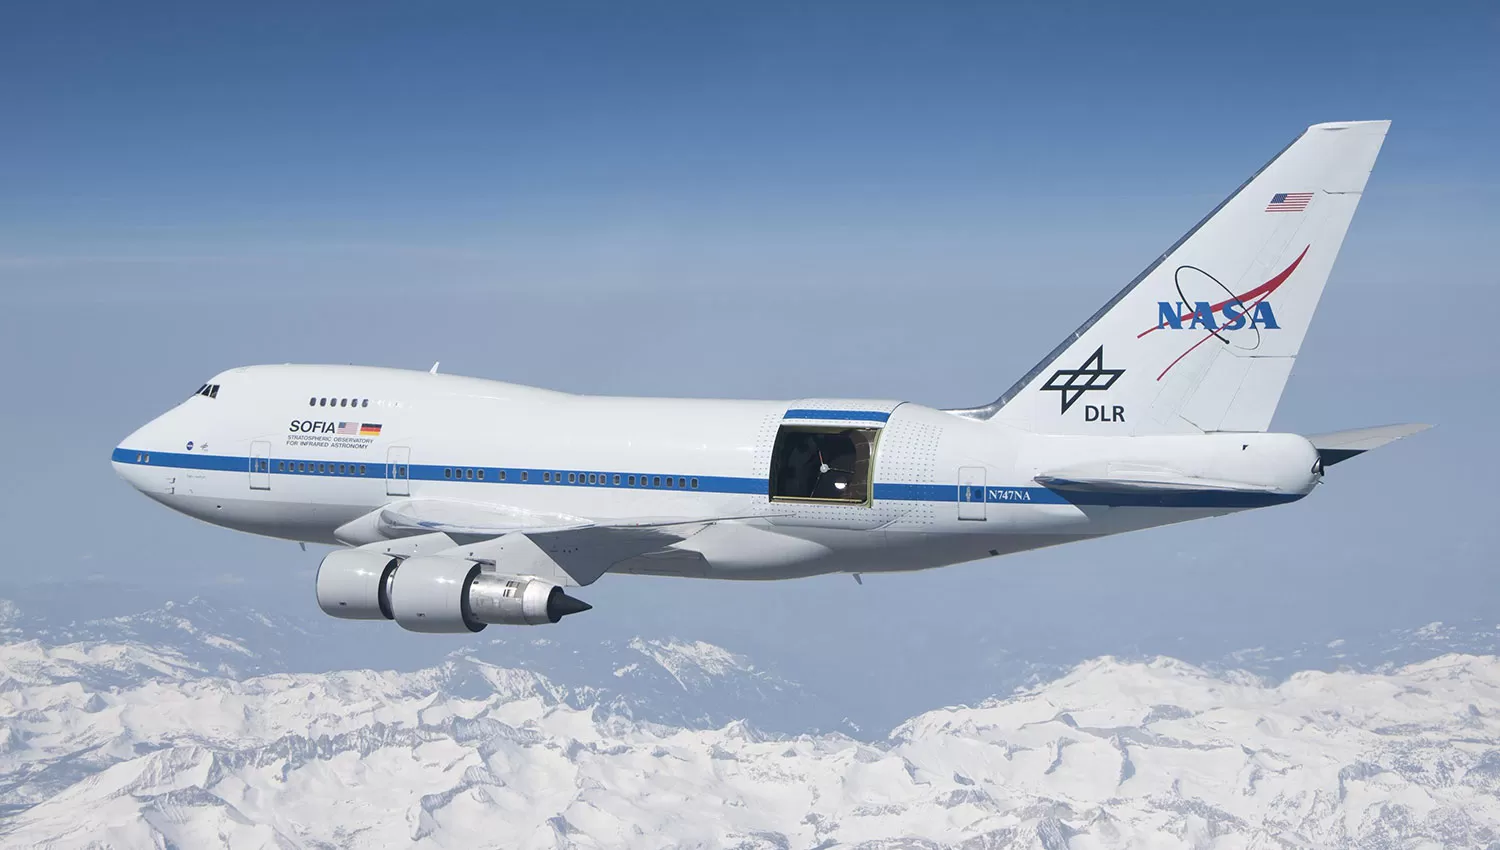 El Stratospheric Observatory for Infrared Astronomy (SOFIA).